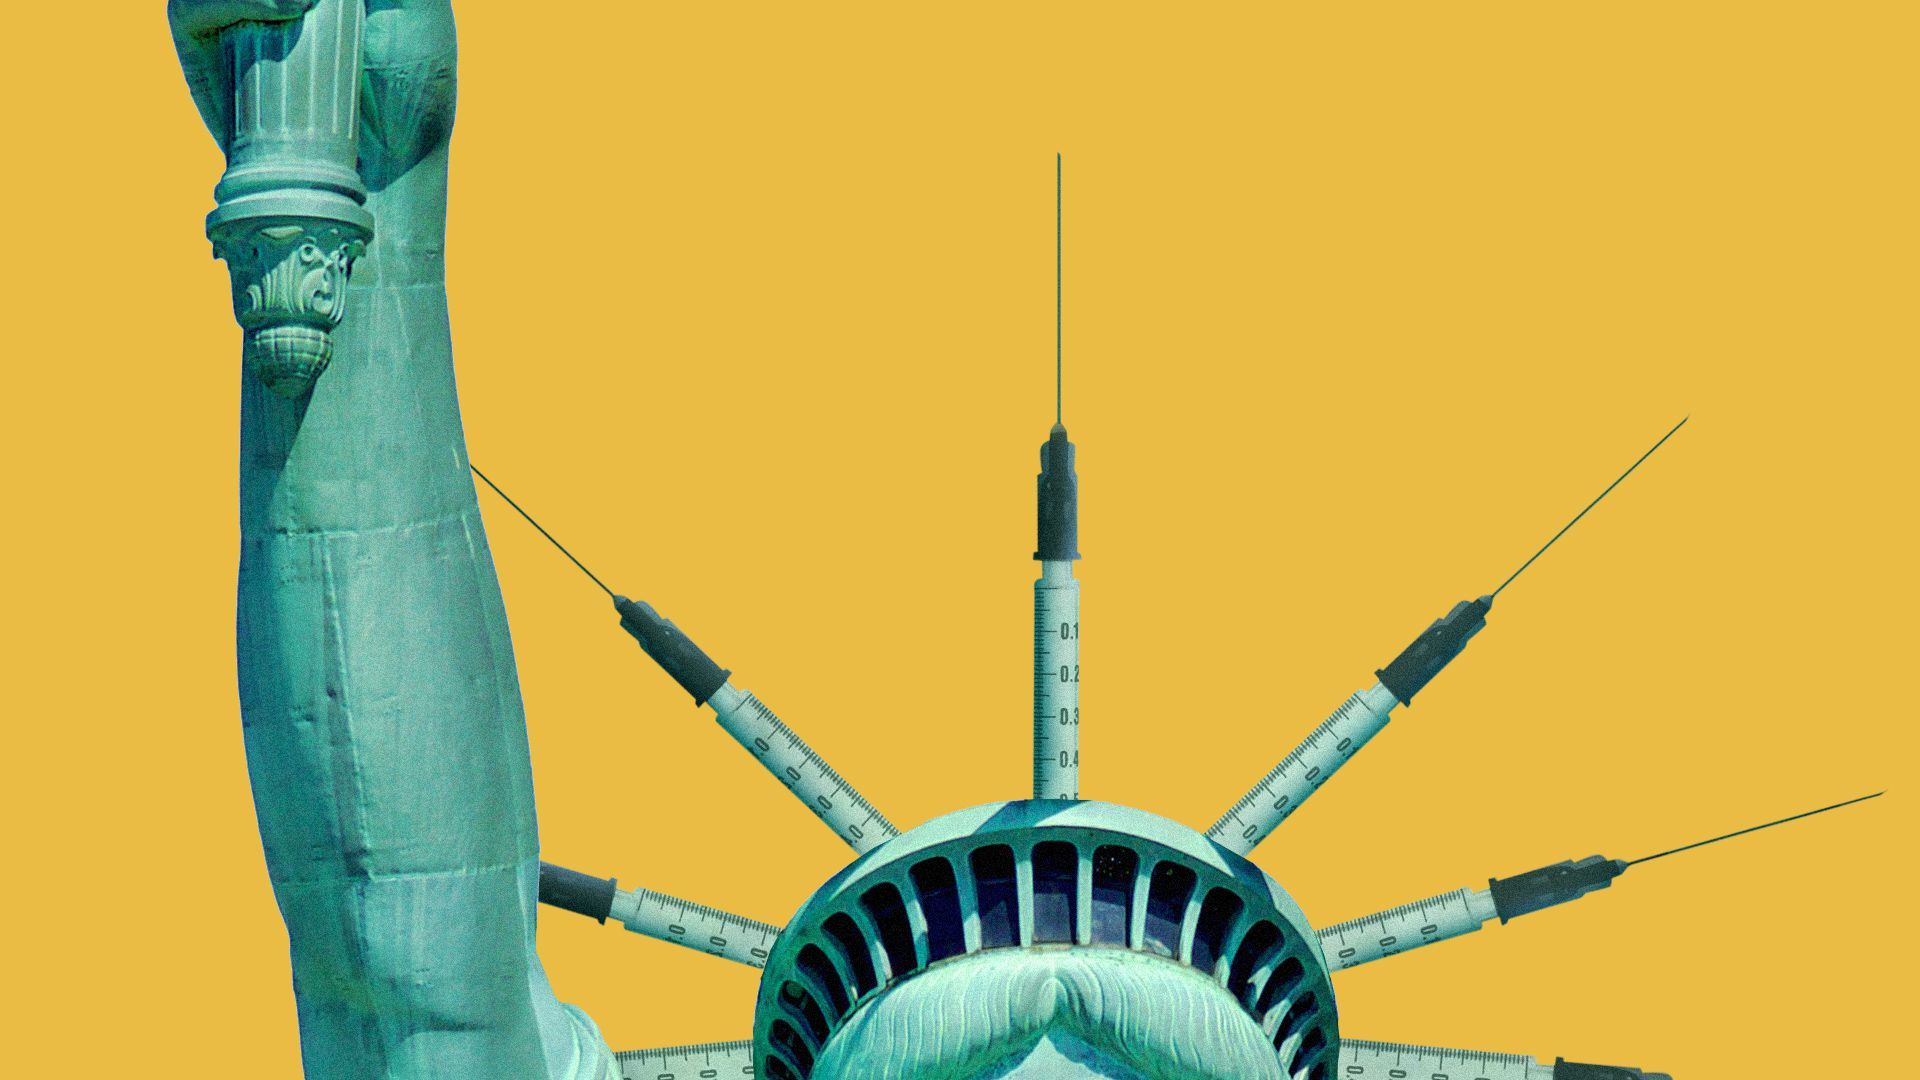 Illustration of the Statue of Liberty with syringes as part of the crown. 